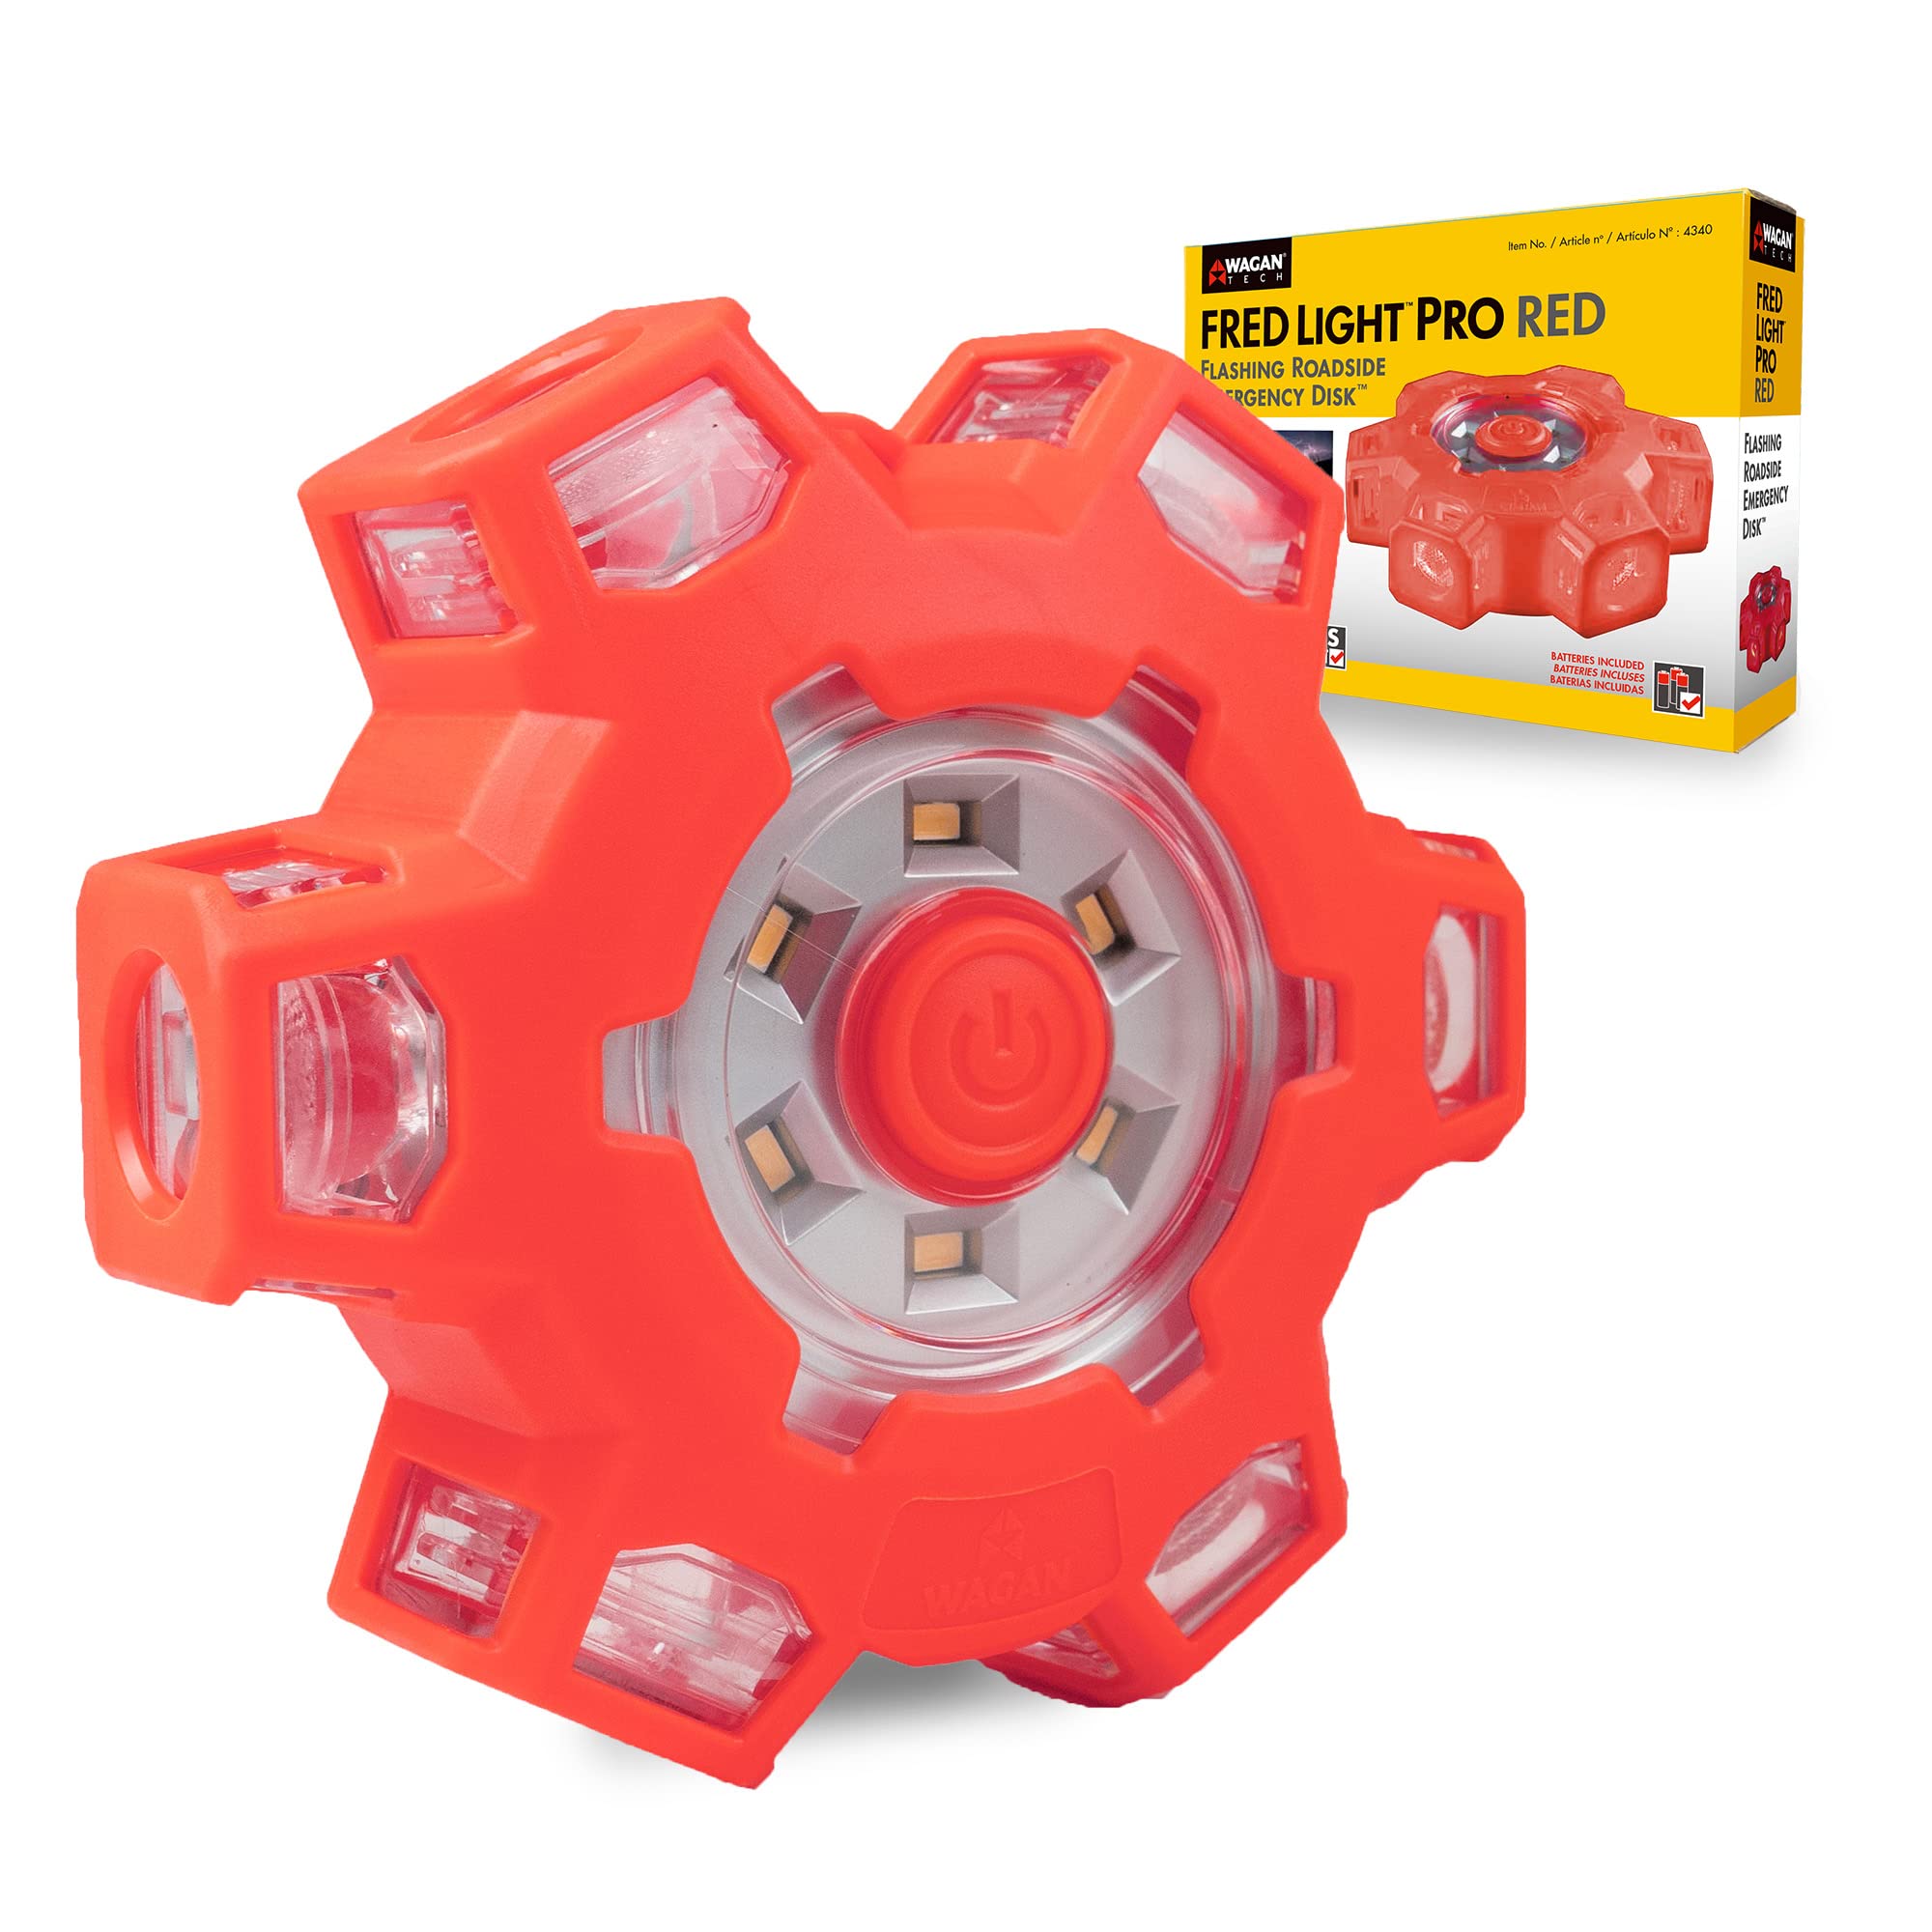 FRED LIGHT PRO RED